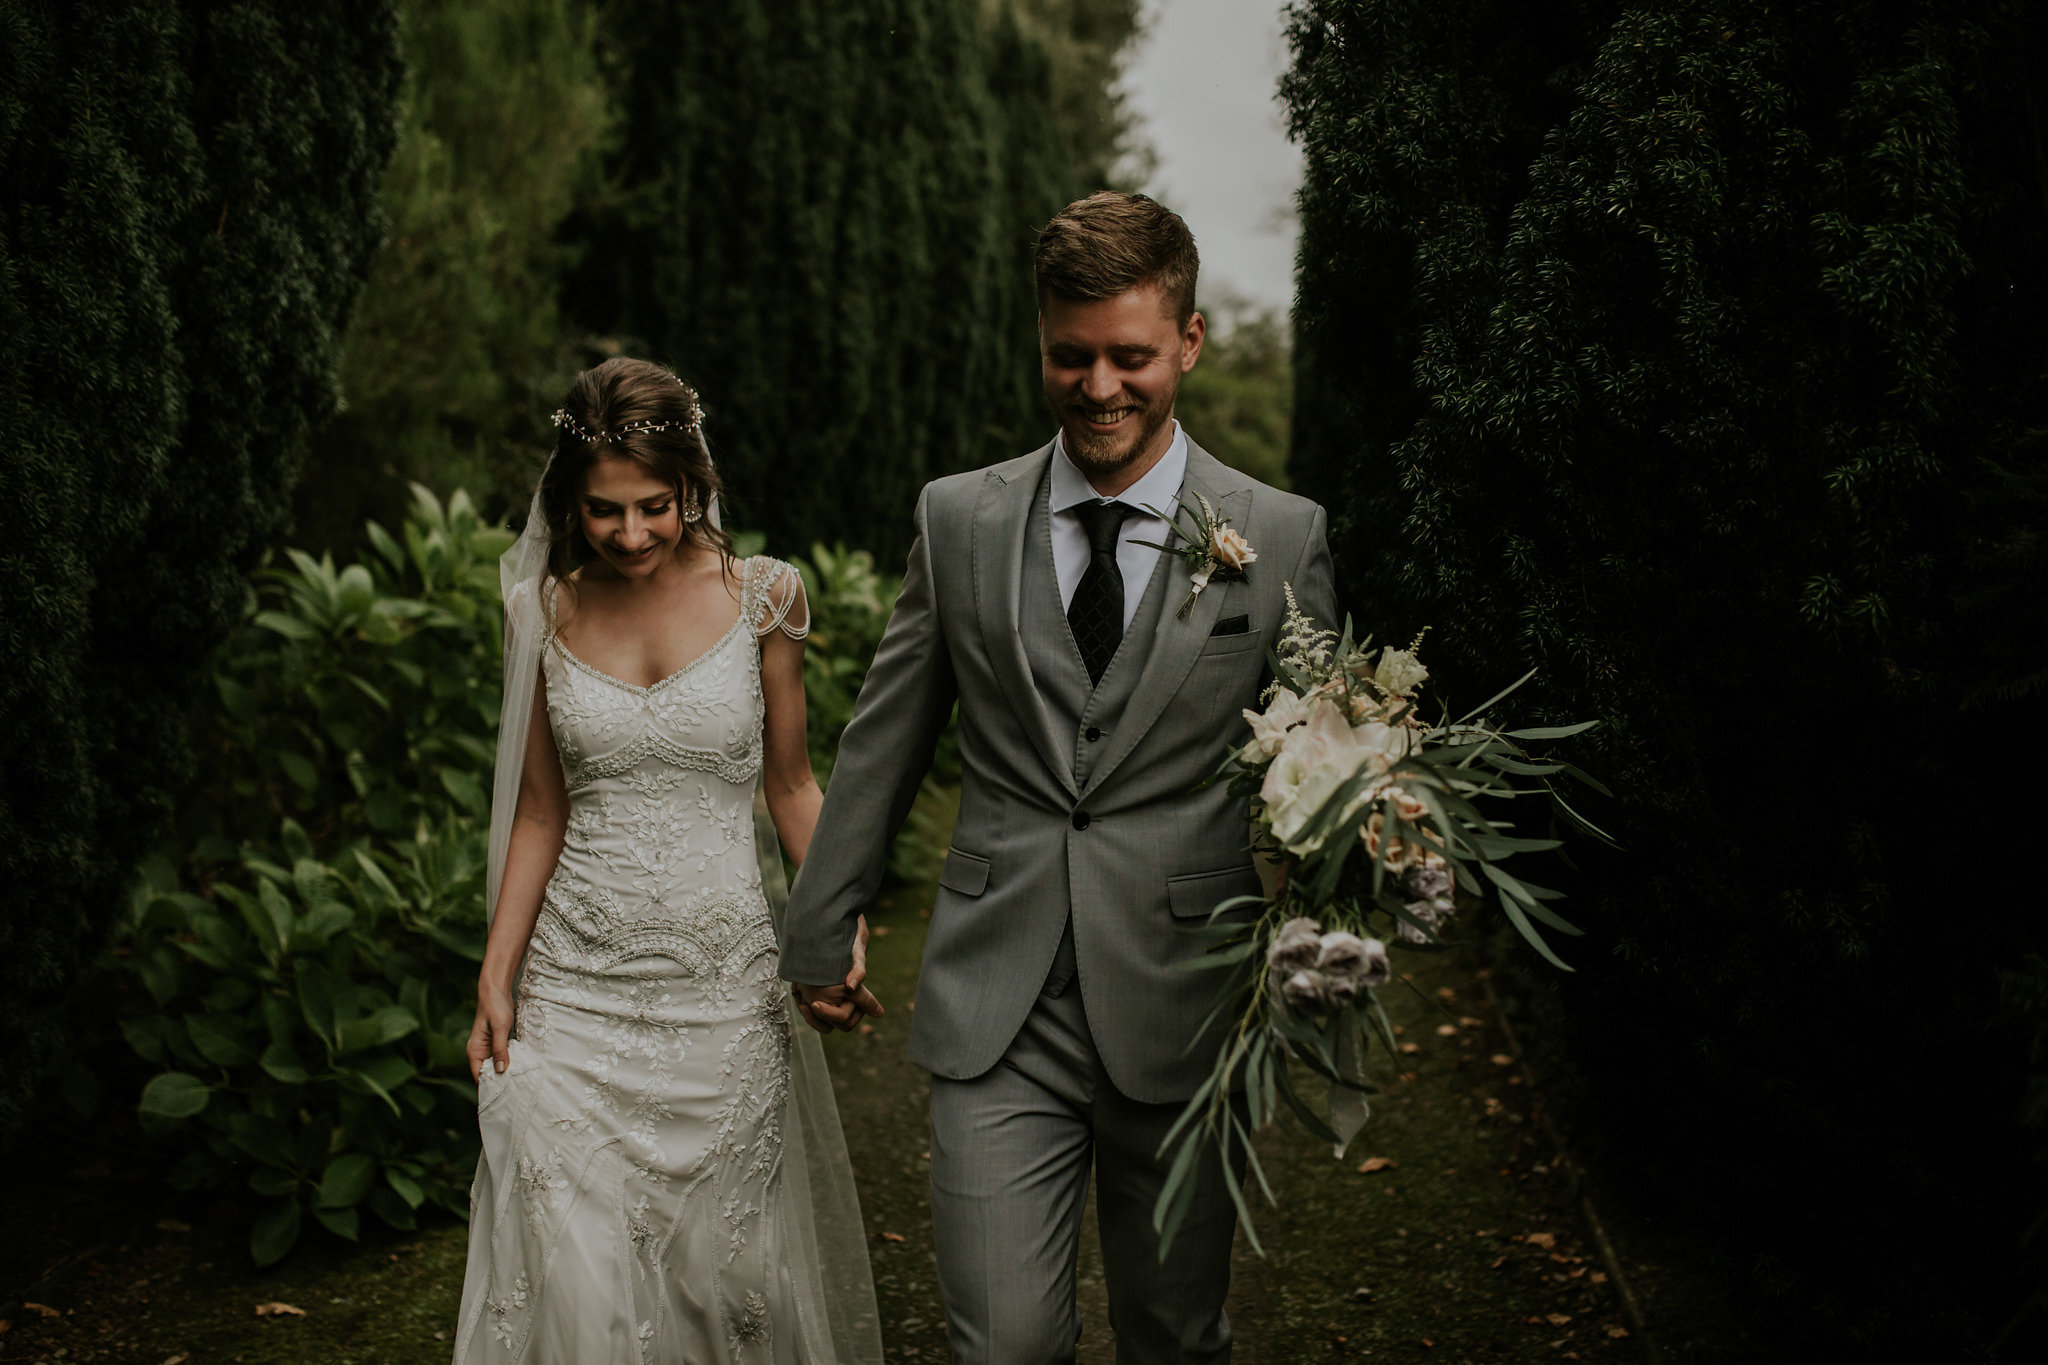 The groom was wearing a three piece grey suit with a dark printed tie